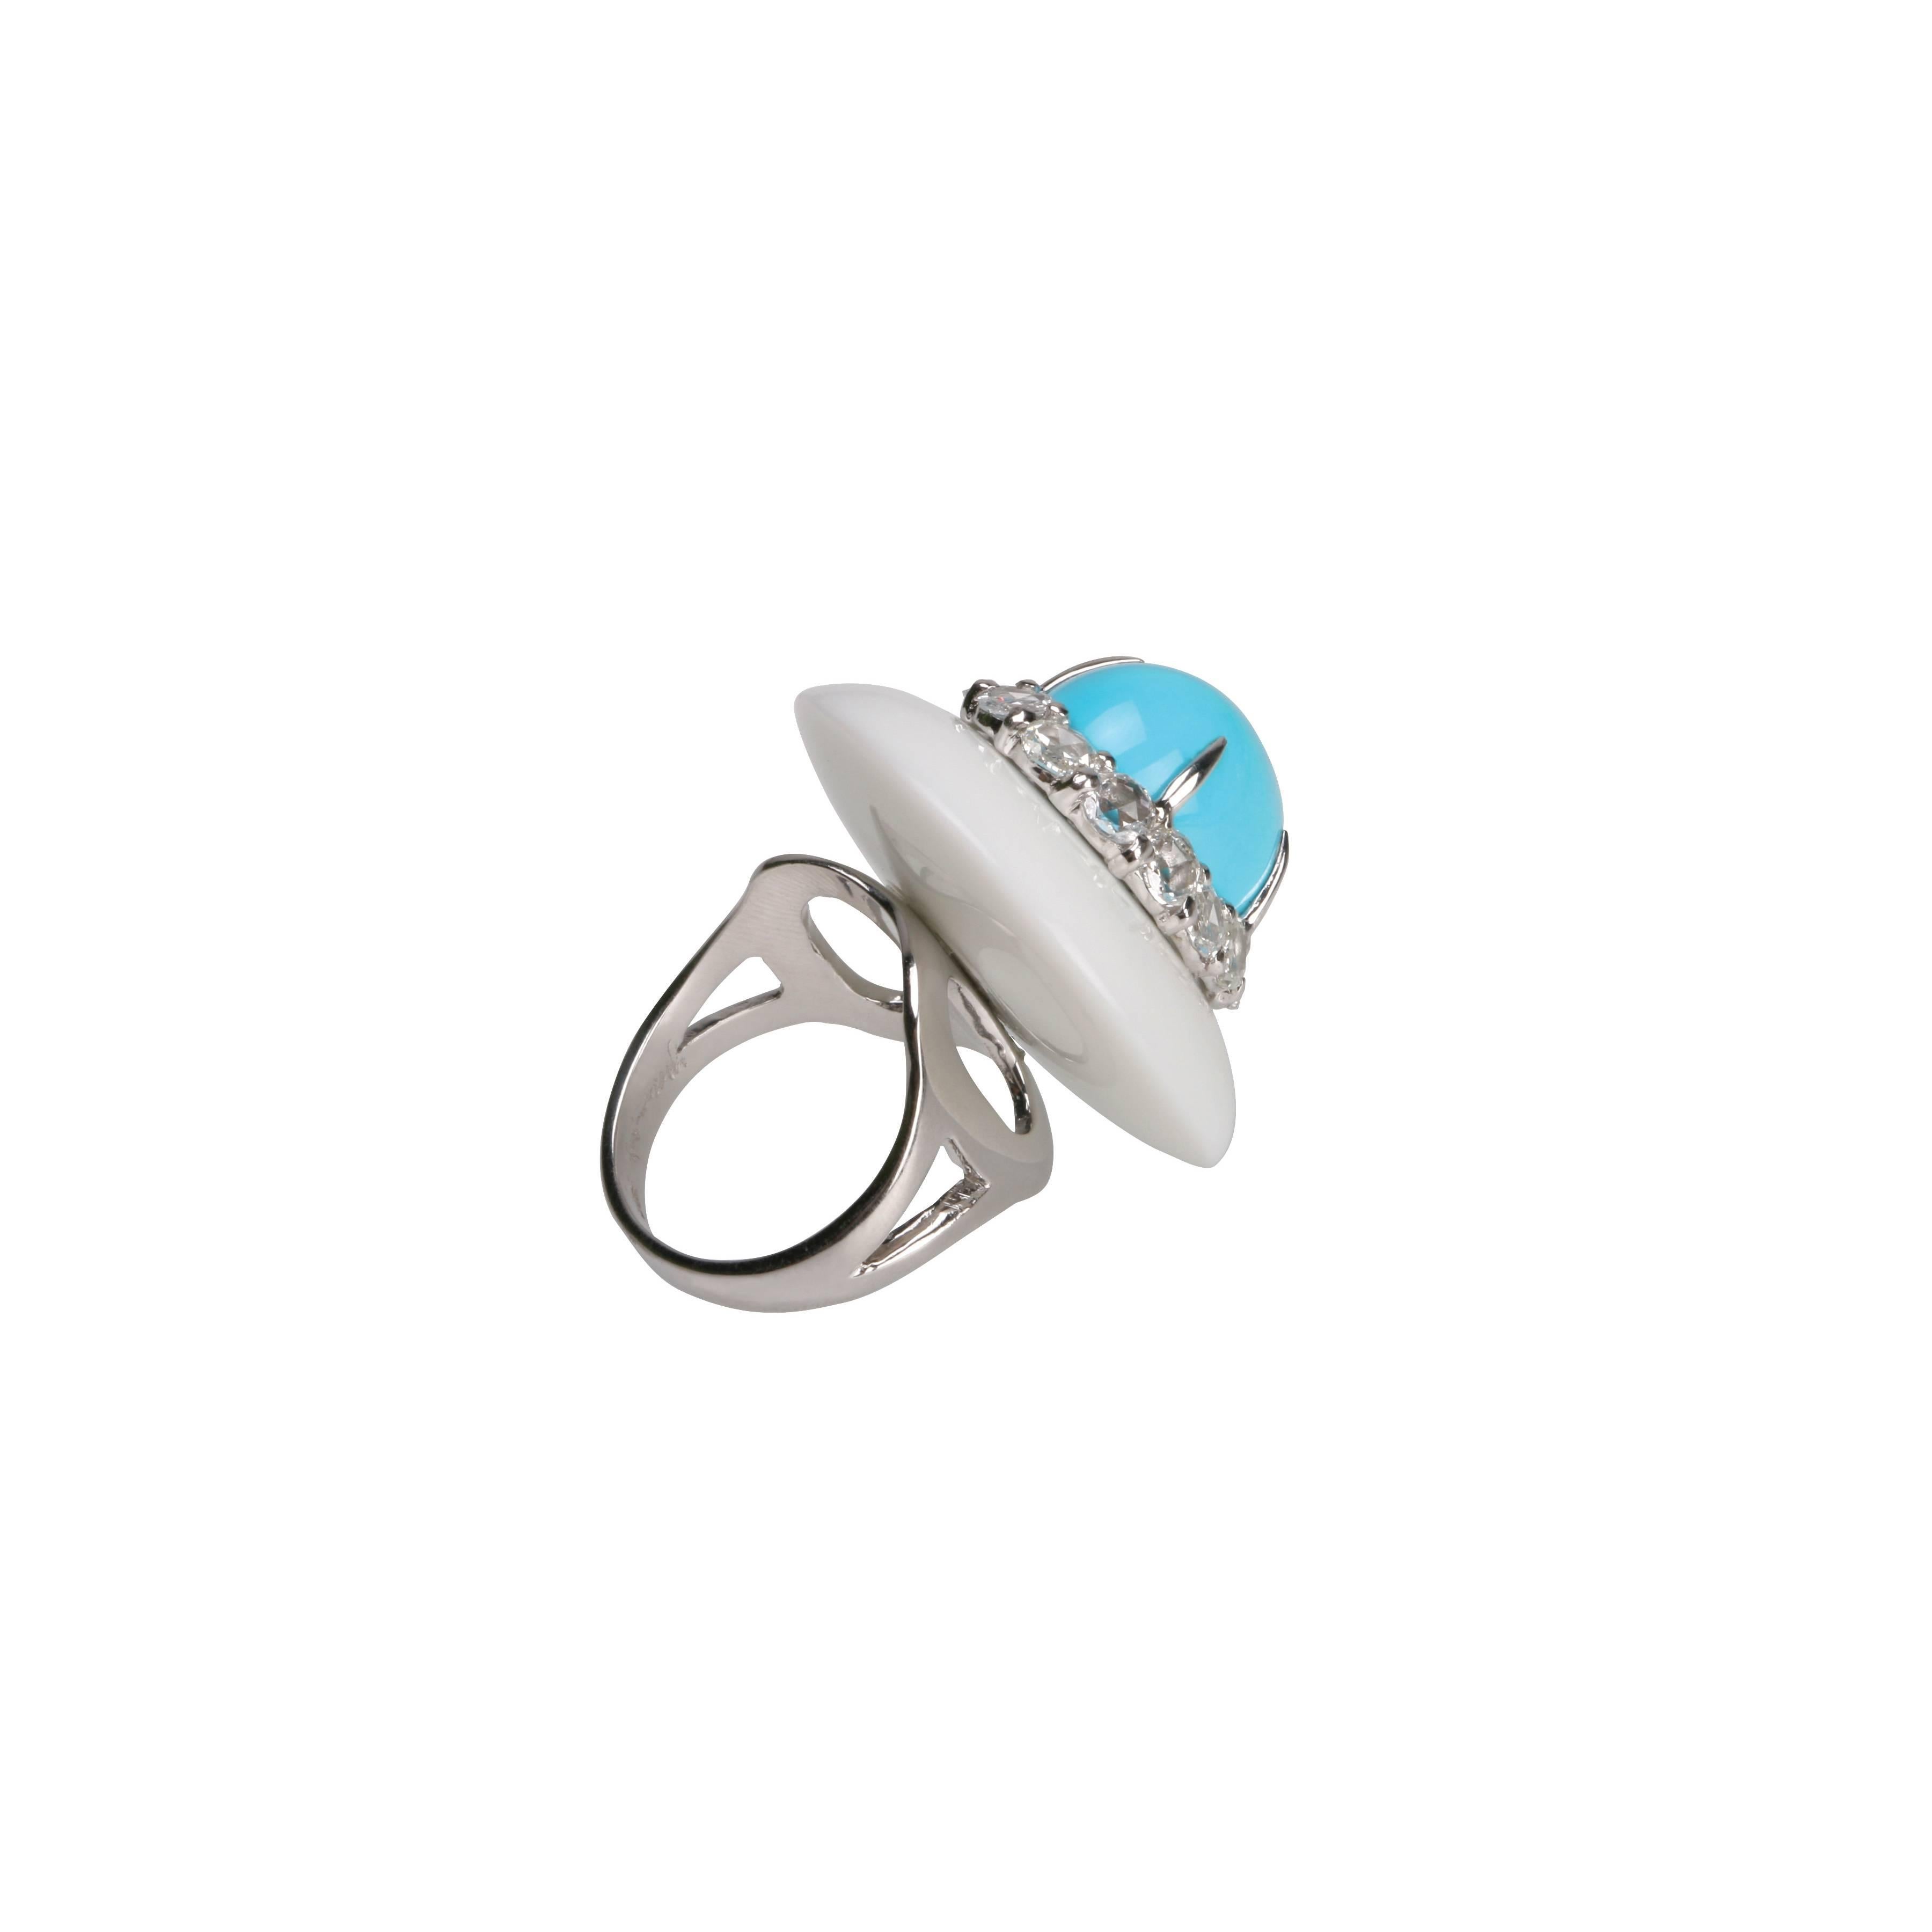 Metal: 18K White Gold
Precious Stones: Agate, Turquoise, Diamonds (1.6ct, 14 pieces)
Ring Size: Standard US Ring Size 6
Please allow for slight variations in measurements as pieces are handmade.
 
CAPRI COLLECTION © 2004
The Capri Cocktail Ring in